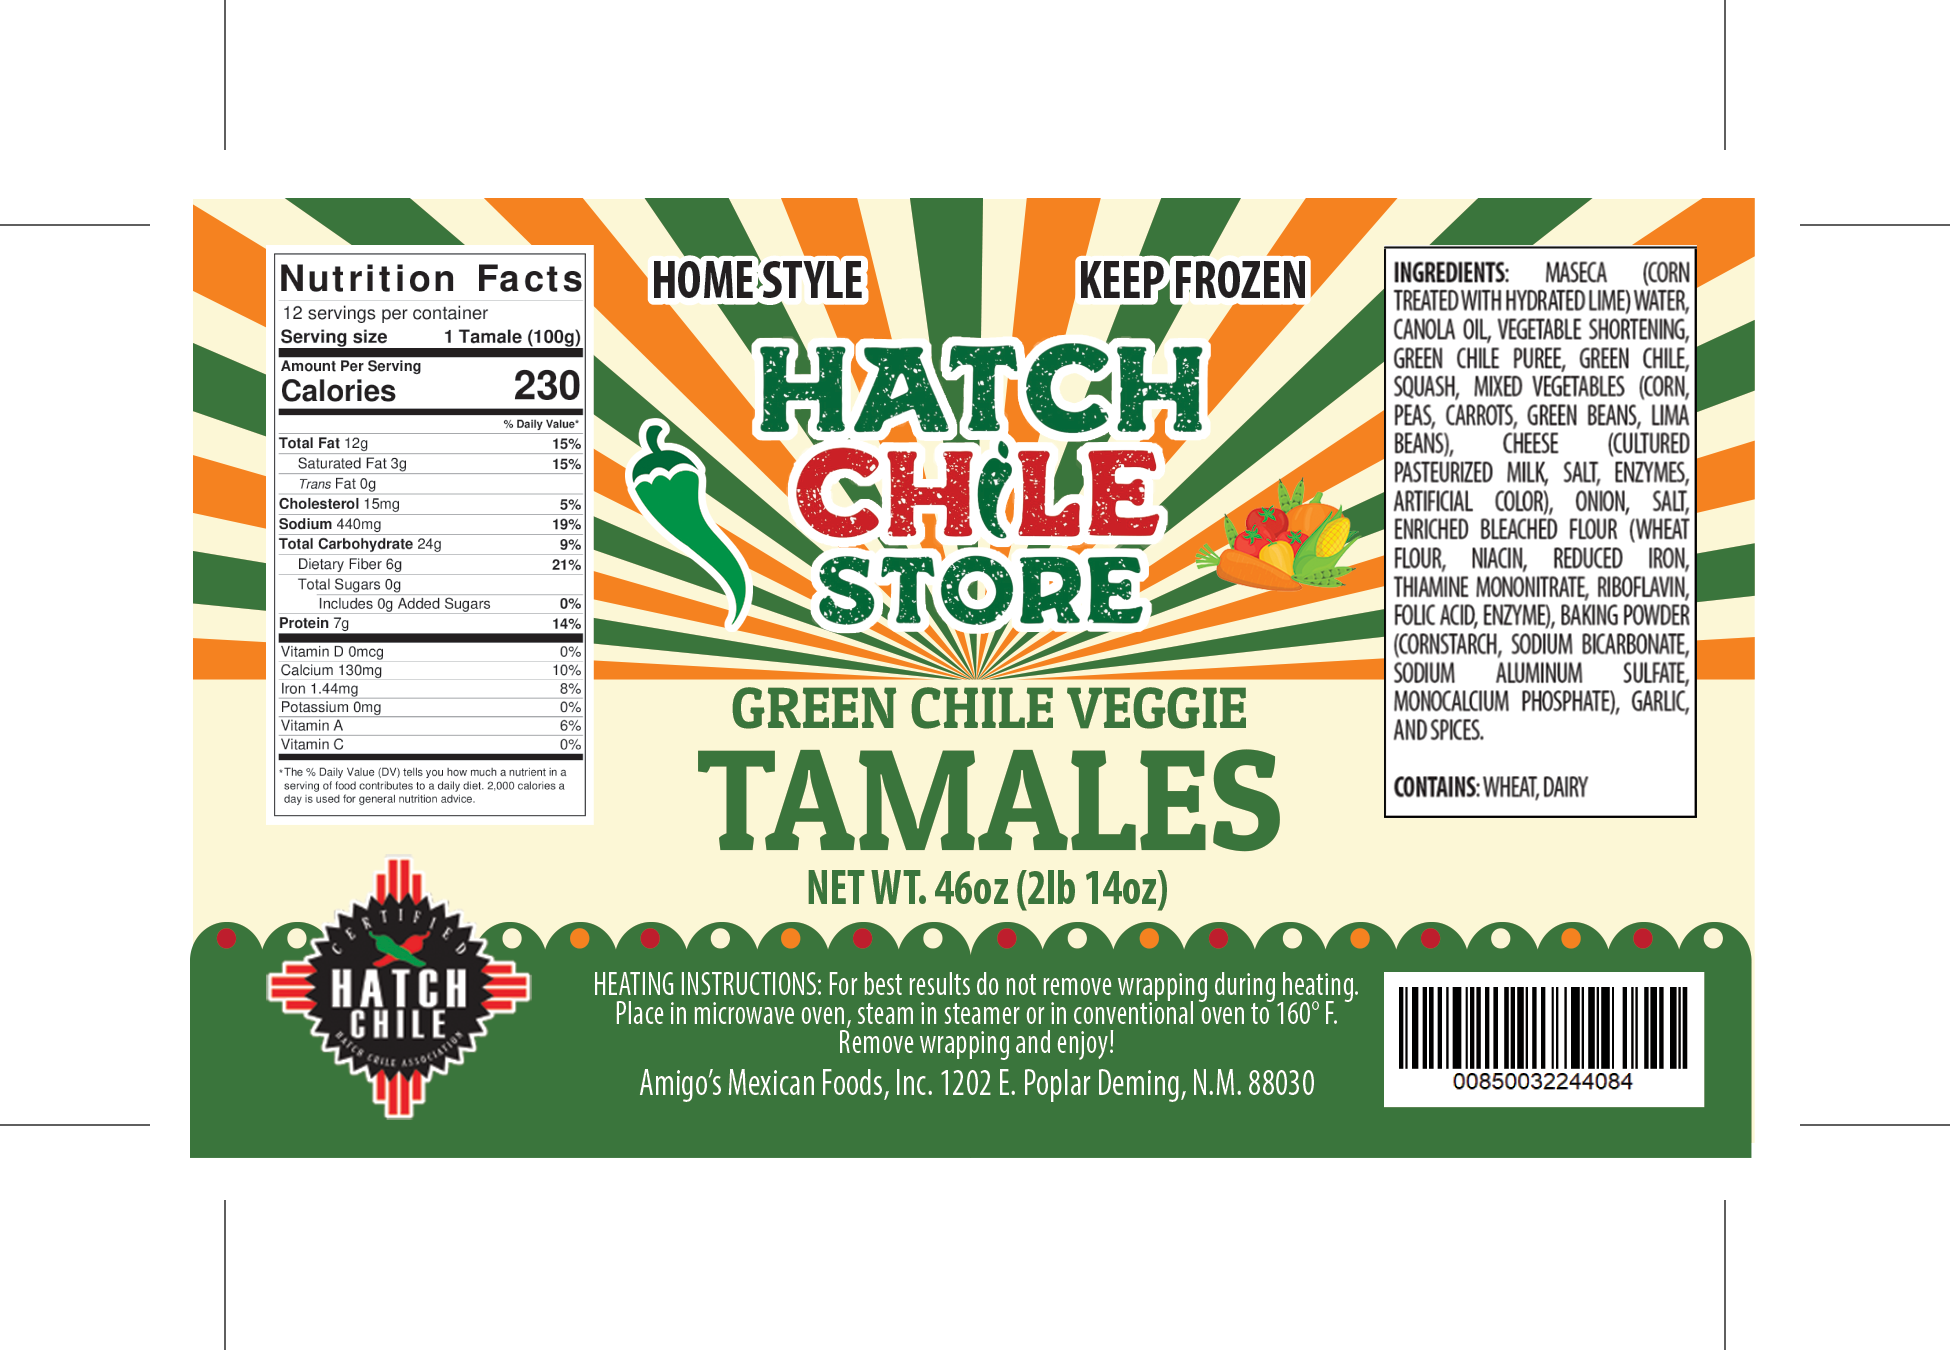 Packaging design for Hatch Green Chile Veggie Tamales, featuring nutritional information, preparation instructions, and a bold graphic pattern with green and orange colors.